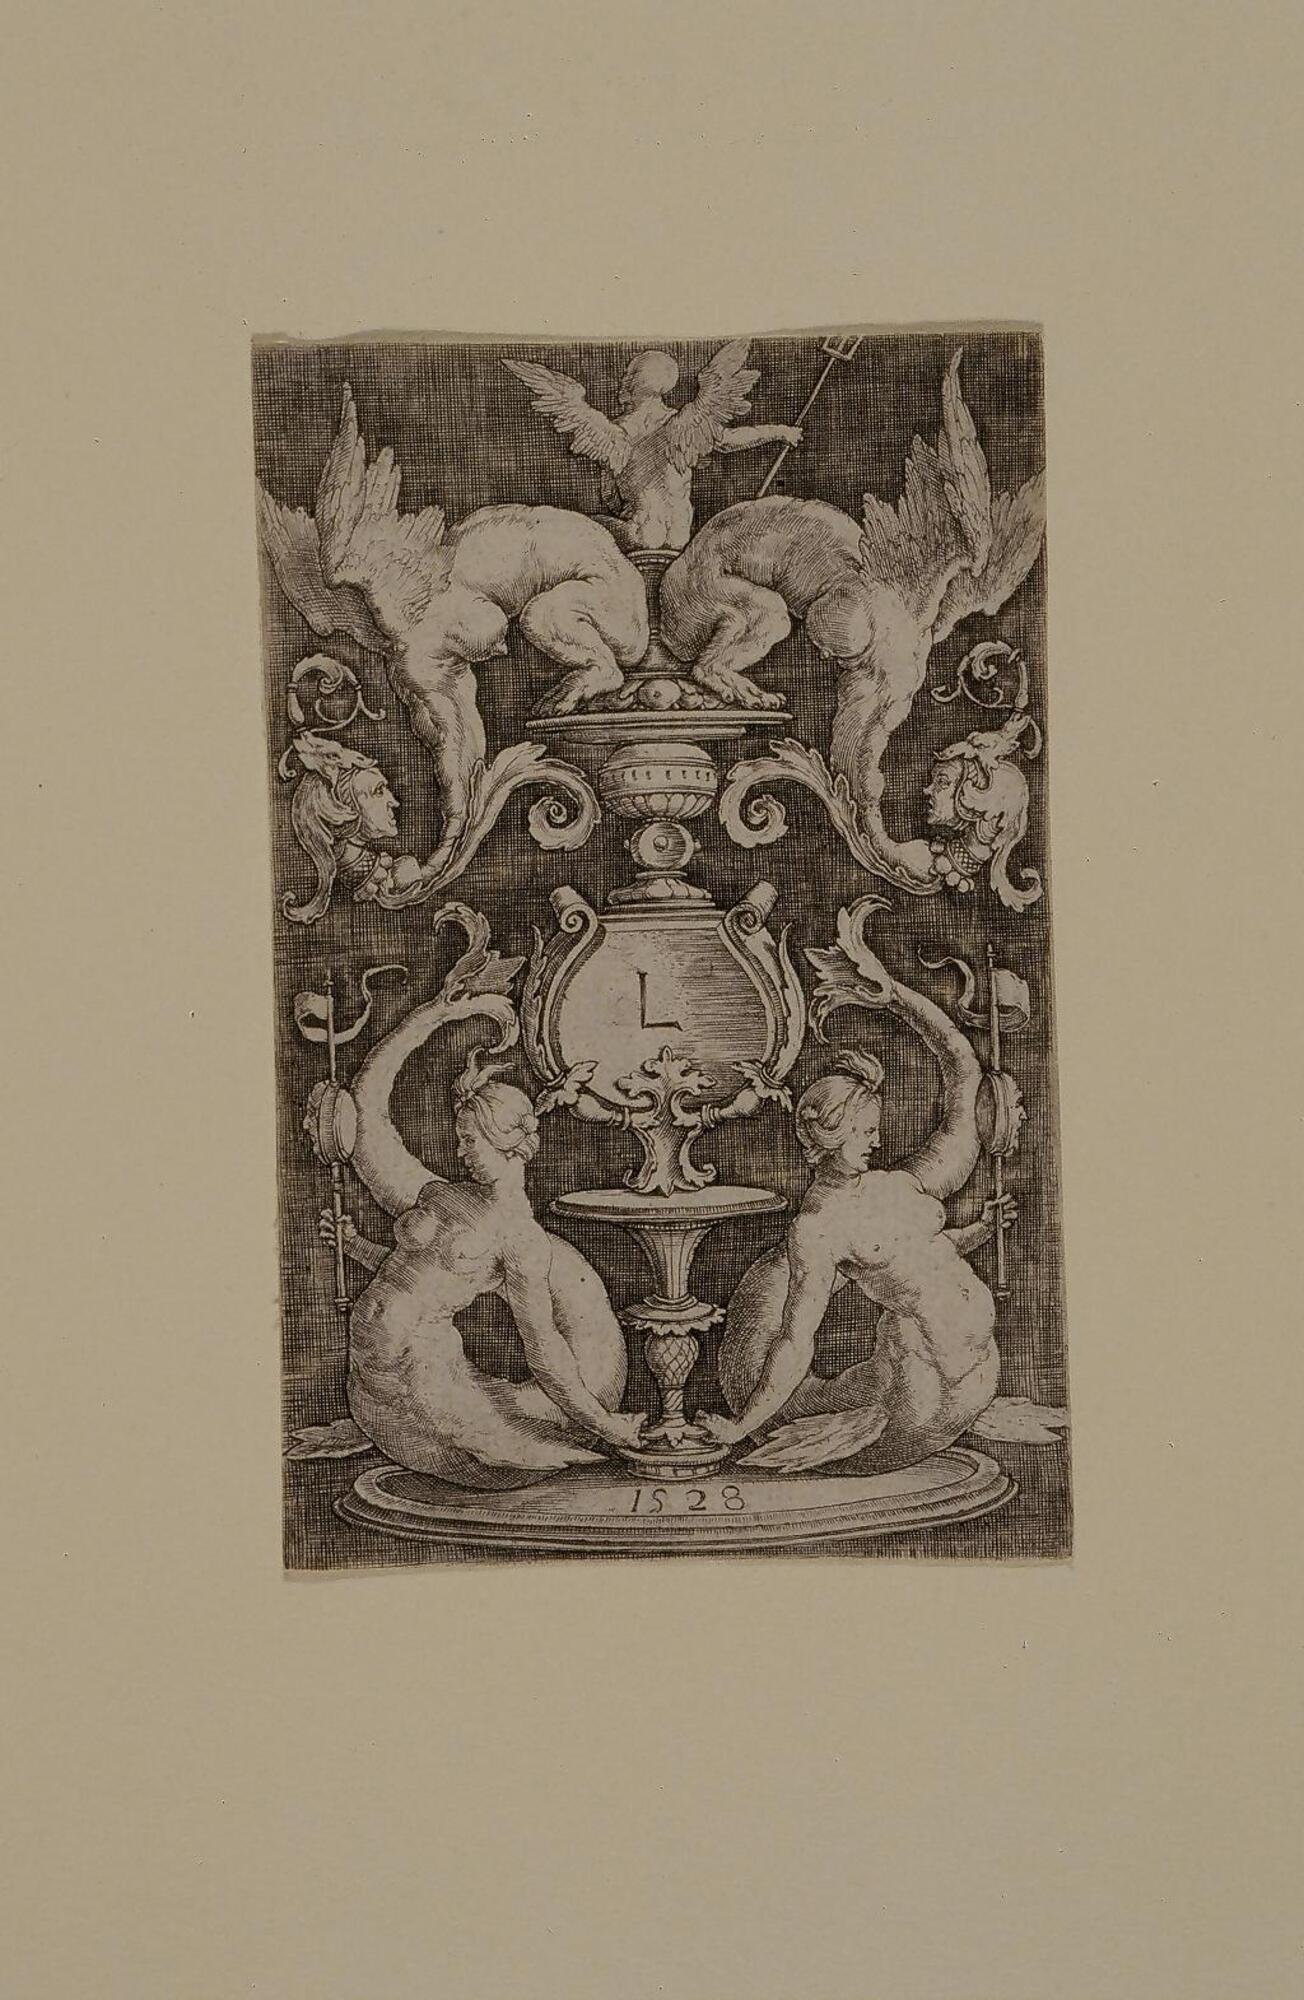 This print depicts an ornamental design. The central axis of the design is composed of a fanciful stand with a nude winged boy holding a trident, seen from the back, seated on the top. A pair of sirens holding small banners flank the base, and a pair of hybrid sphinx-like creatures perch near the top. The letter "L" appears in the center of the stand and the date "1528" is inscribed in the base.